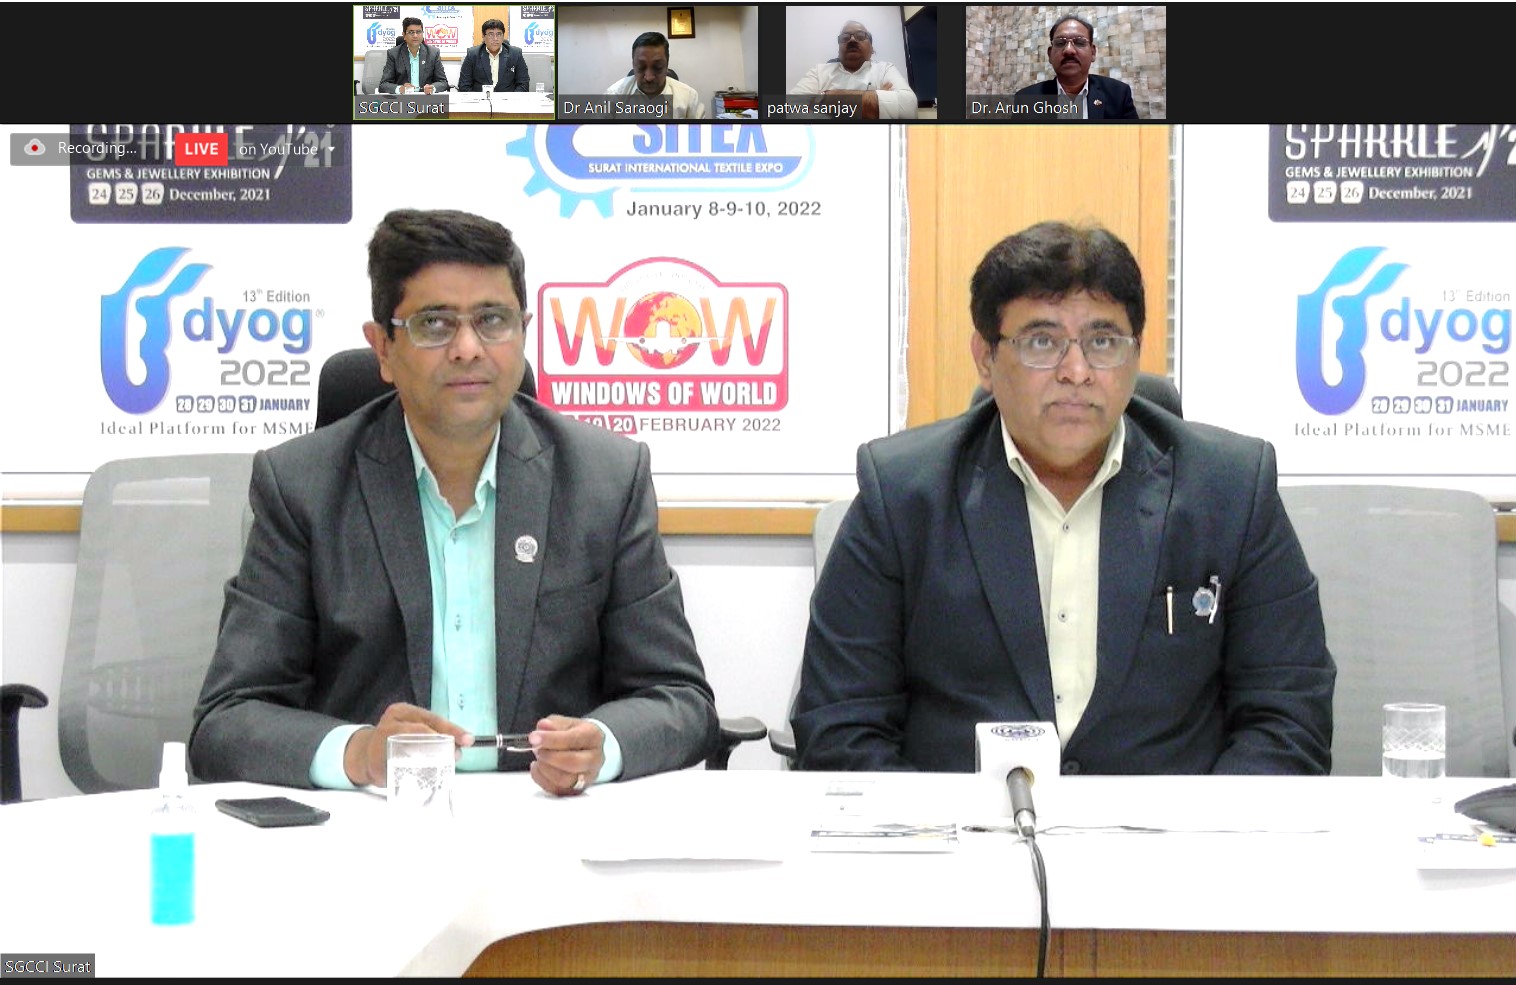 Webinar on ‘Global Funding’ by the Chamber for the purpose of providing guidance to entrepreneurs